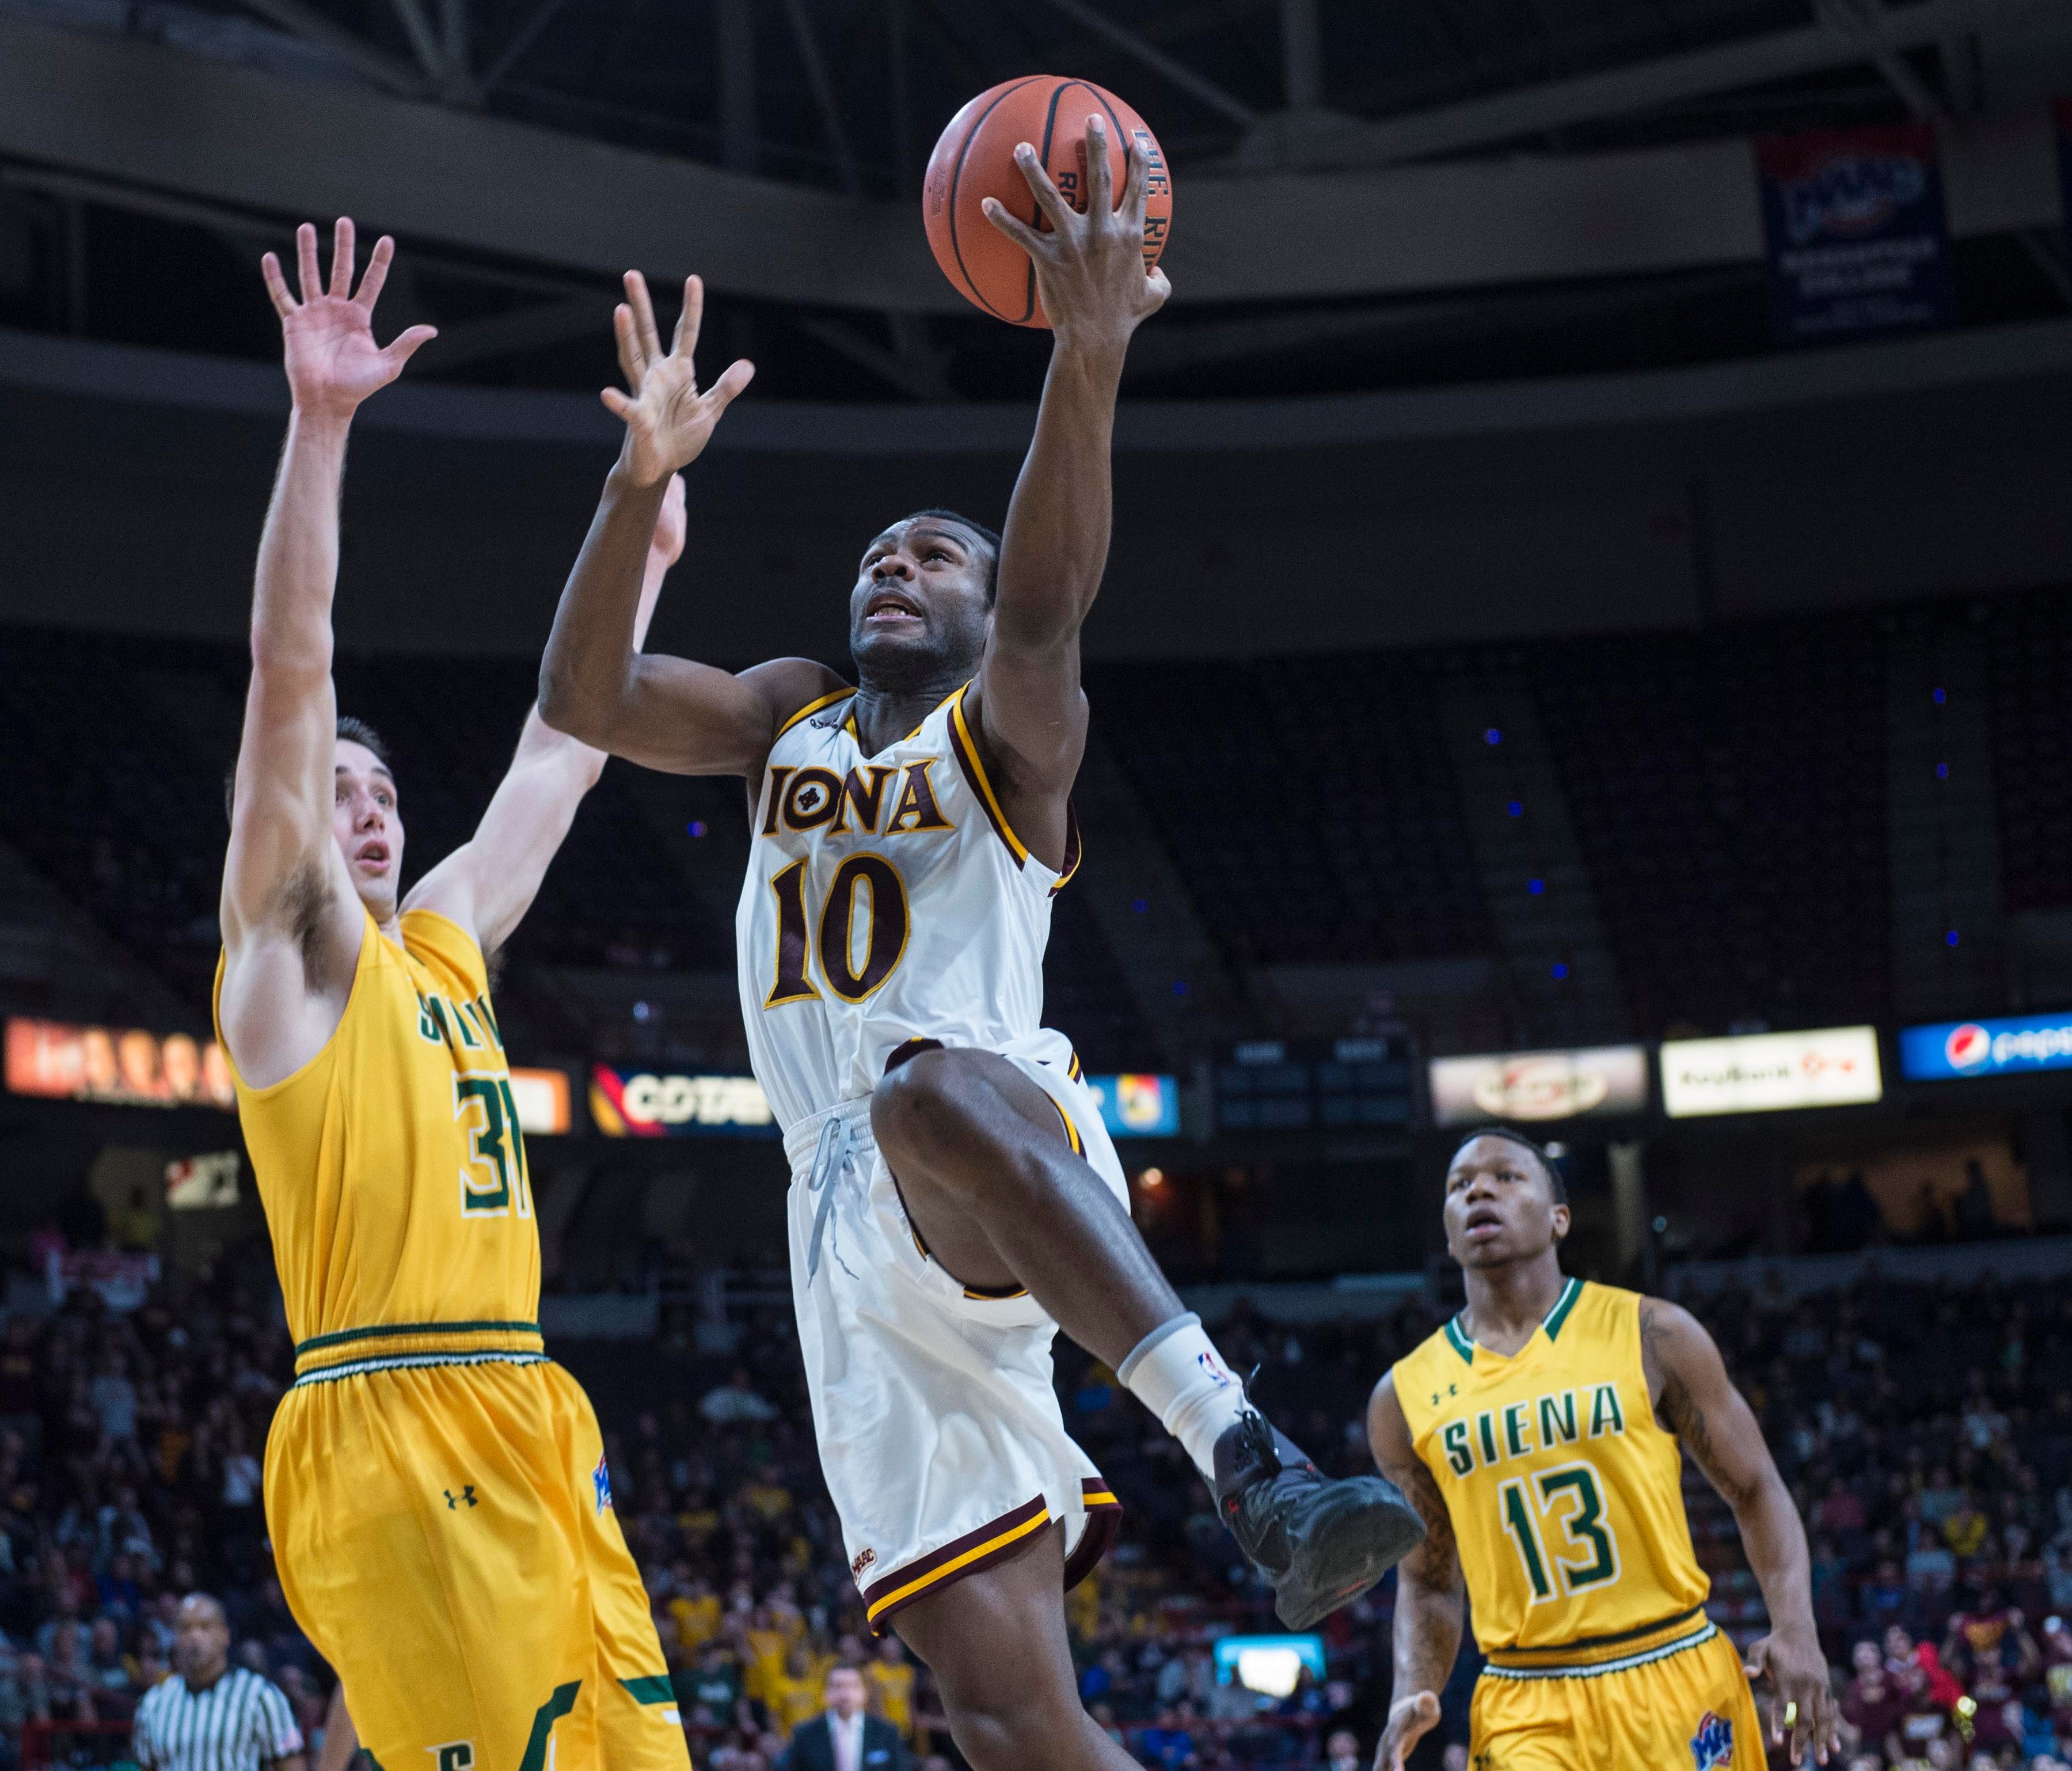 Iona guard Jon Severe drives to the basket against Siena's Brett Bisping at Times Union Center in Albany, N.Y.